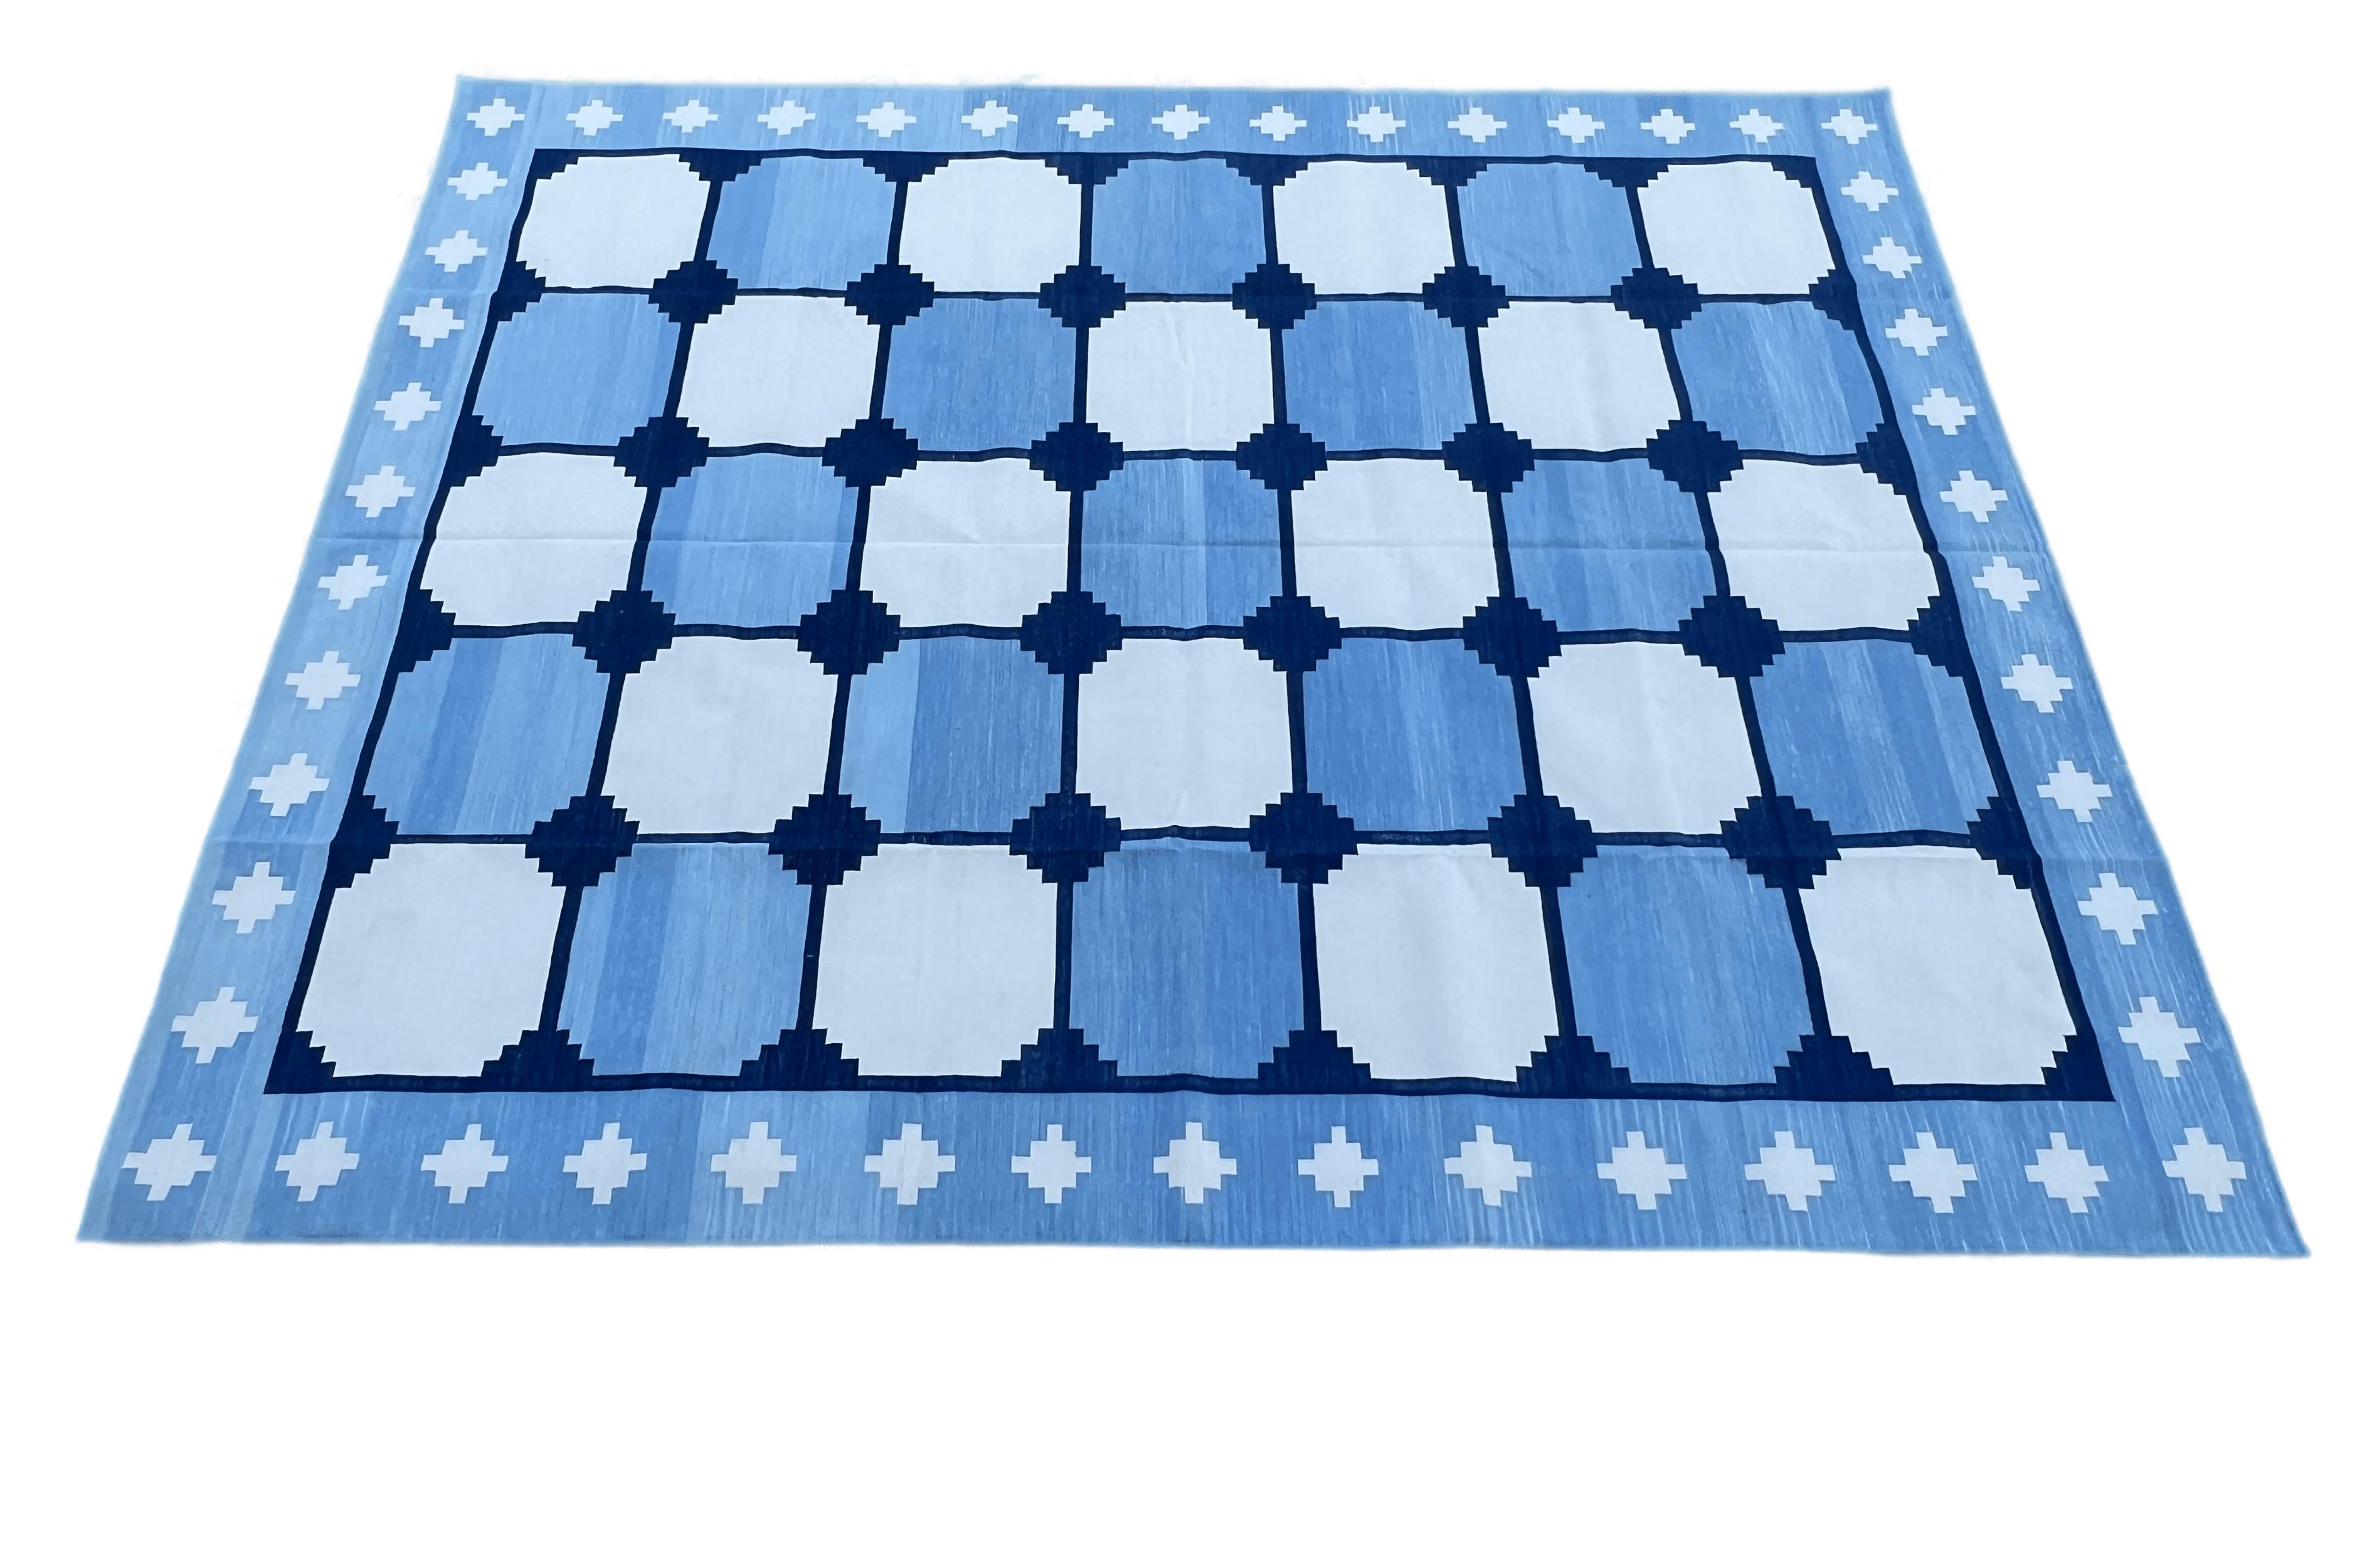 Cotton Vegetable Dyed Reversible Blue And White Geometric Patterned Tile Indian Rug - 8'x10'
These special flat-weave dhurries are hand-woven with 15 ply 100% cotton yarn. Due to the special manufacturing techniques used to create our rugs, the size